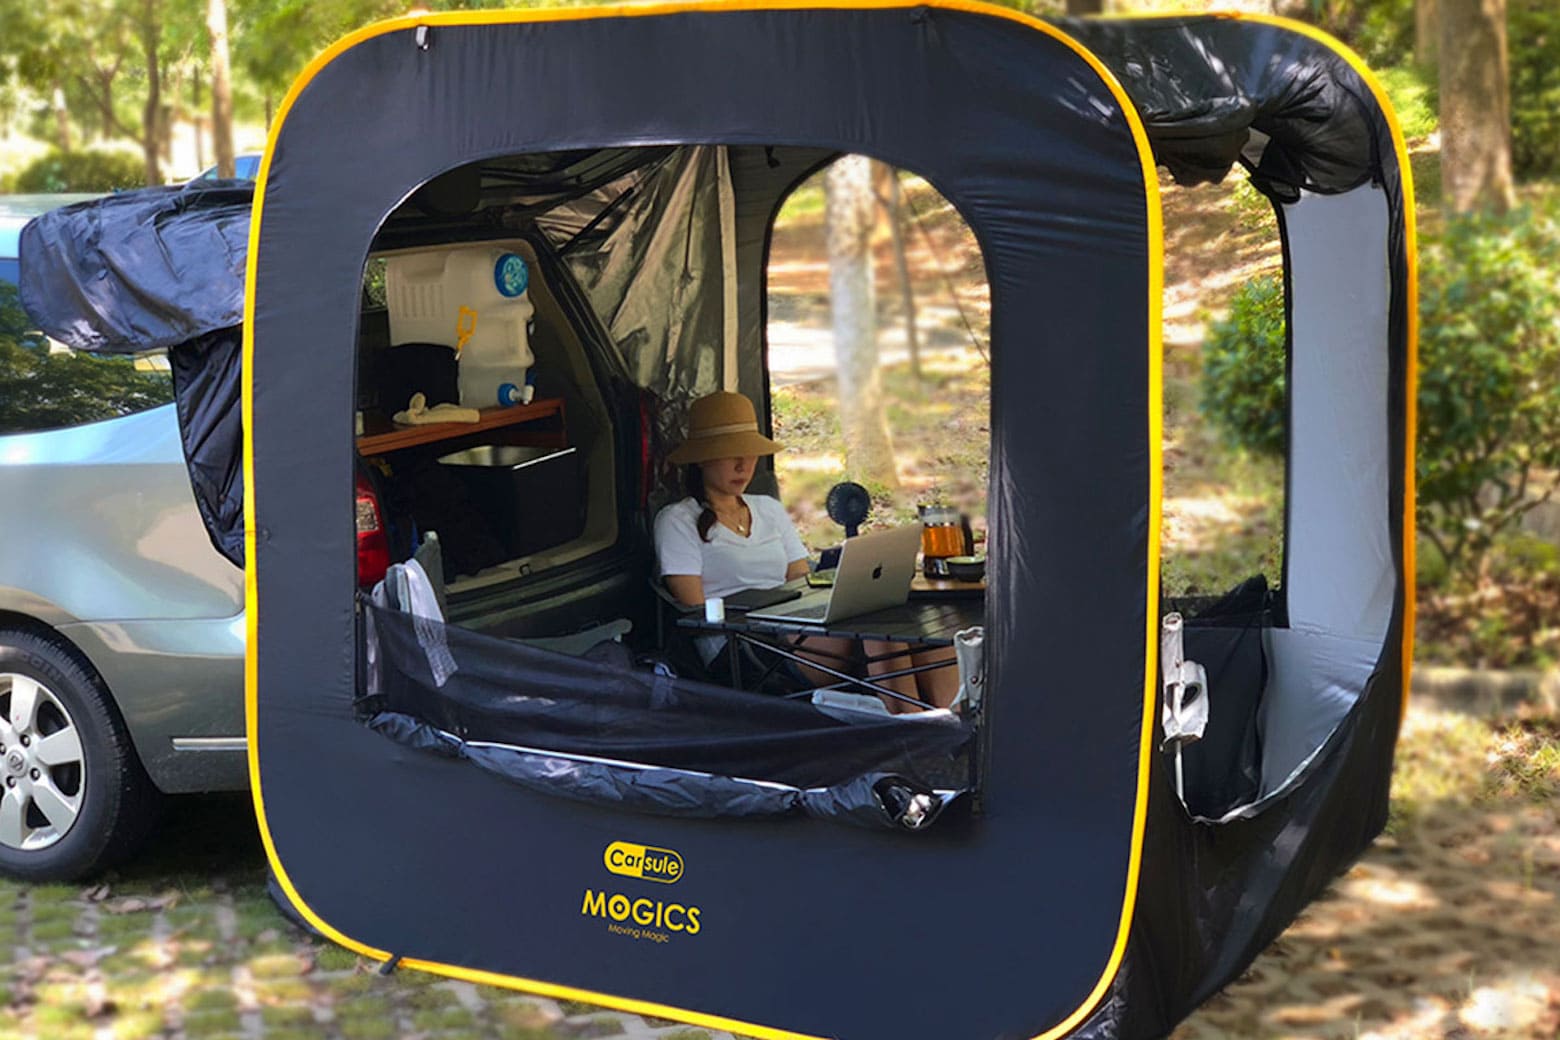 Discover the world in 2022 with this top-rated automotive tenting cabin